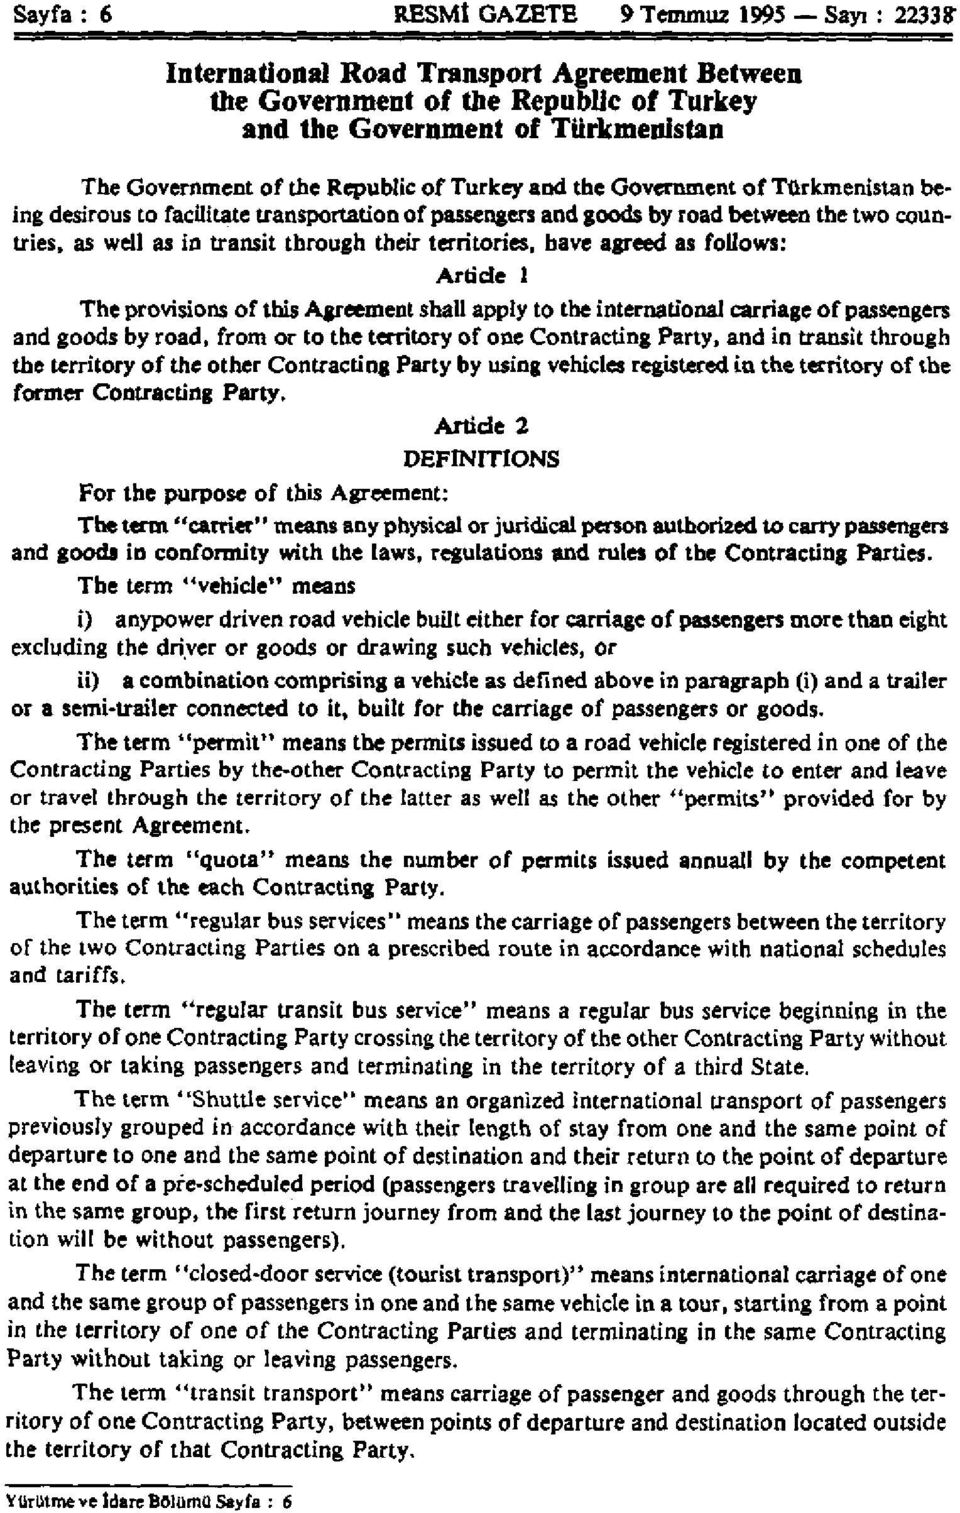 territories, have agreed as follows: Article 1 The provisions of this Agreement shall apply to the international carriage of passengers and goods by road, from or to the territory of one Contracting